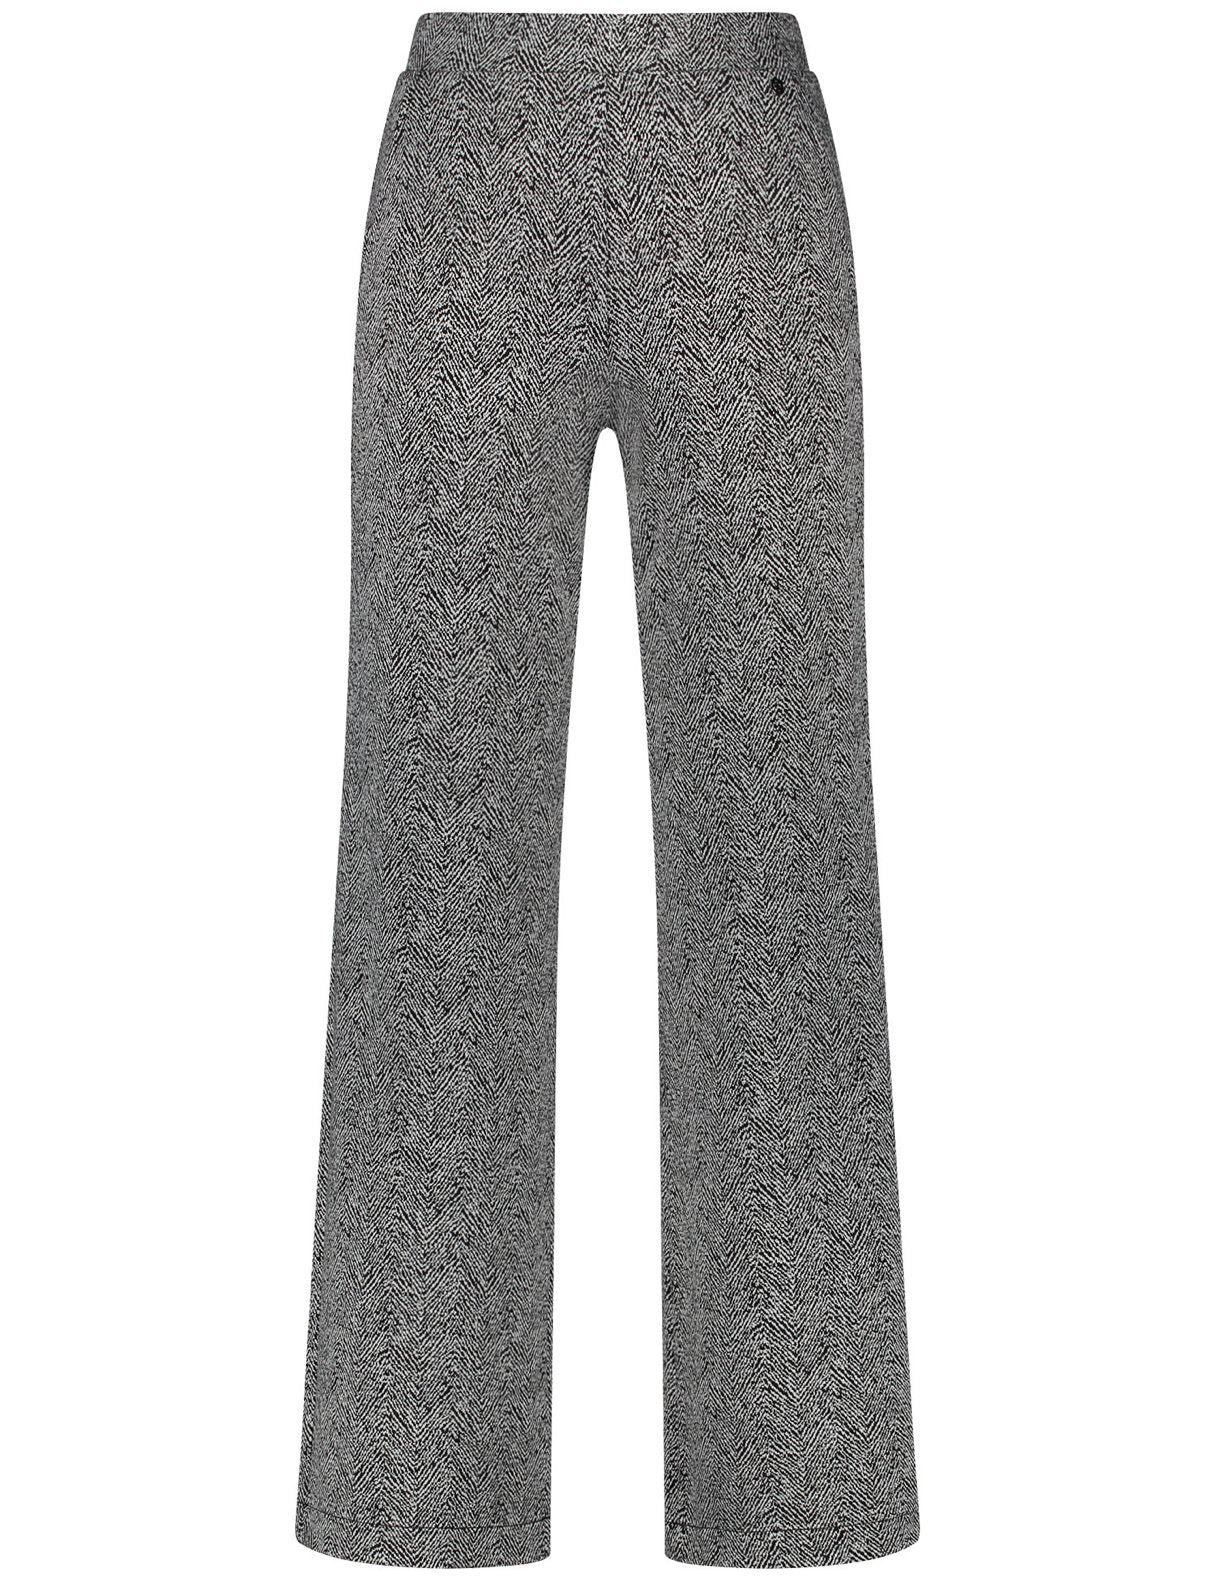 Pull-On Trousers With A Wide Leg And A Fine Houndstooth Pattern_122085-66281_1090_02